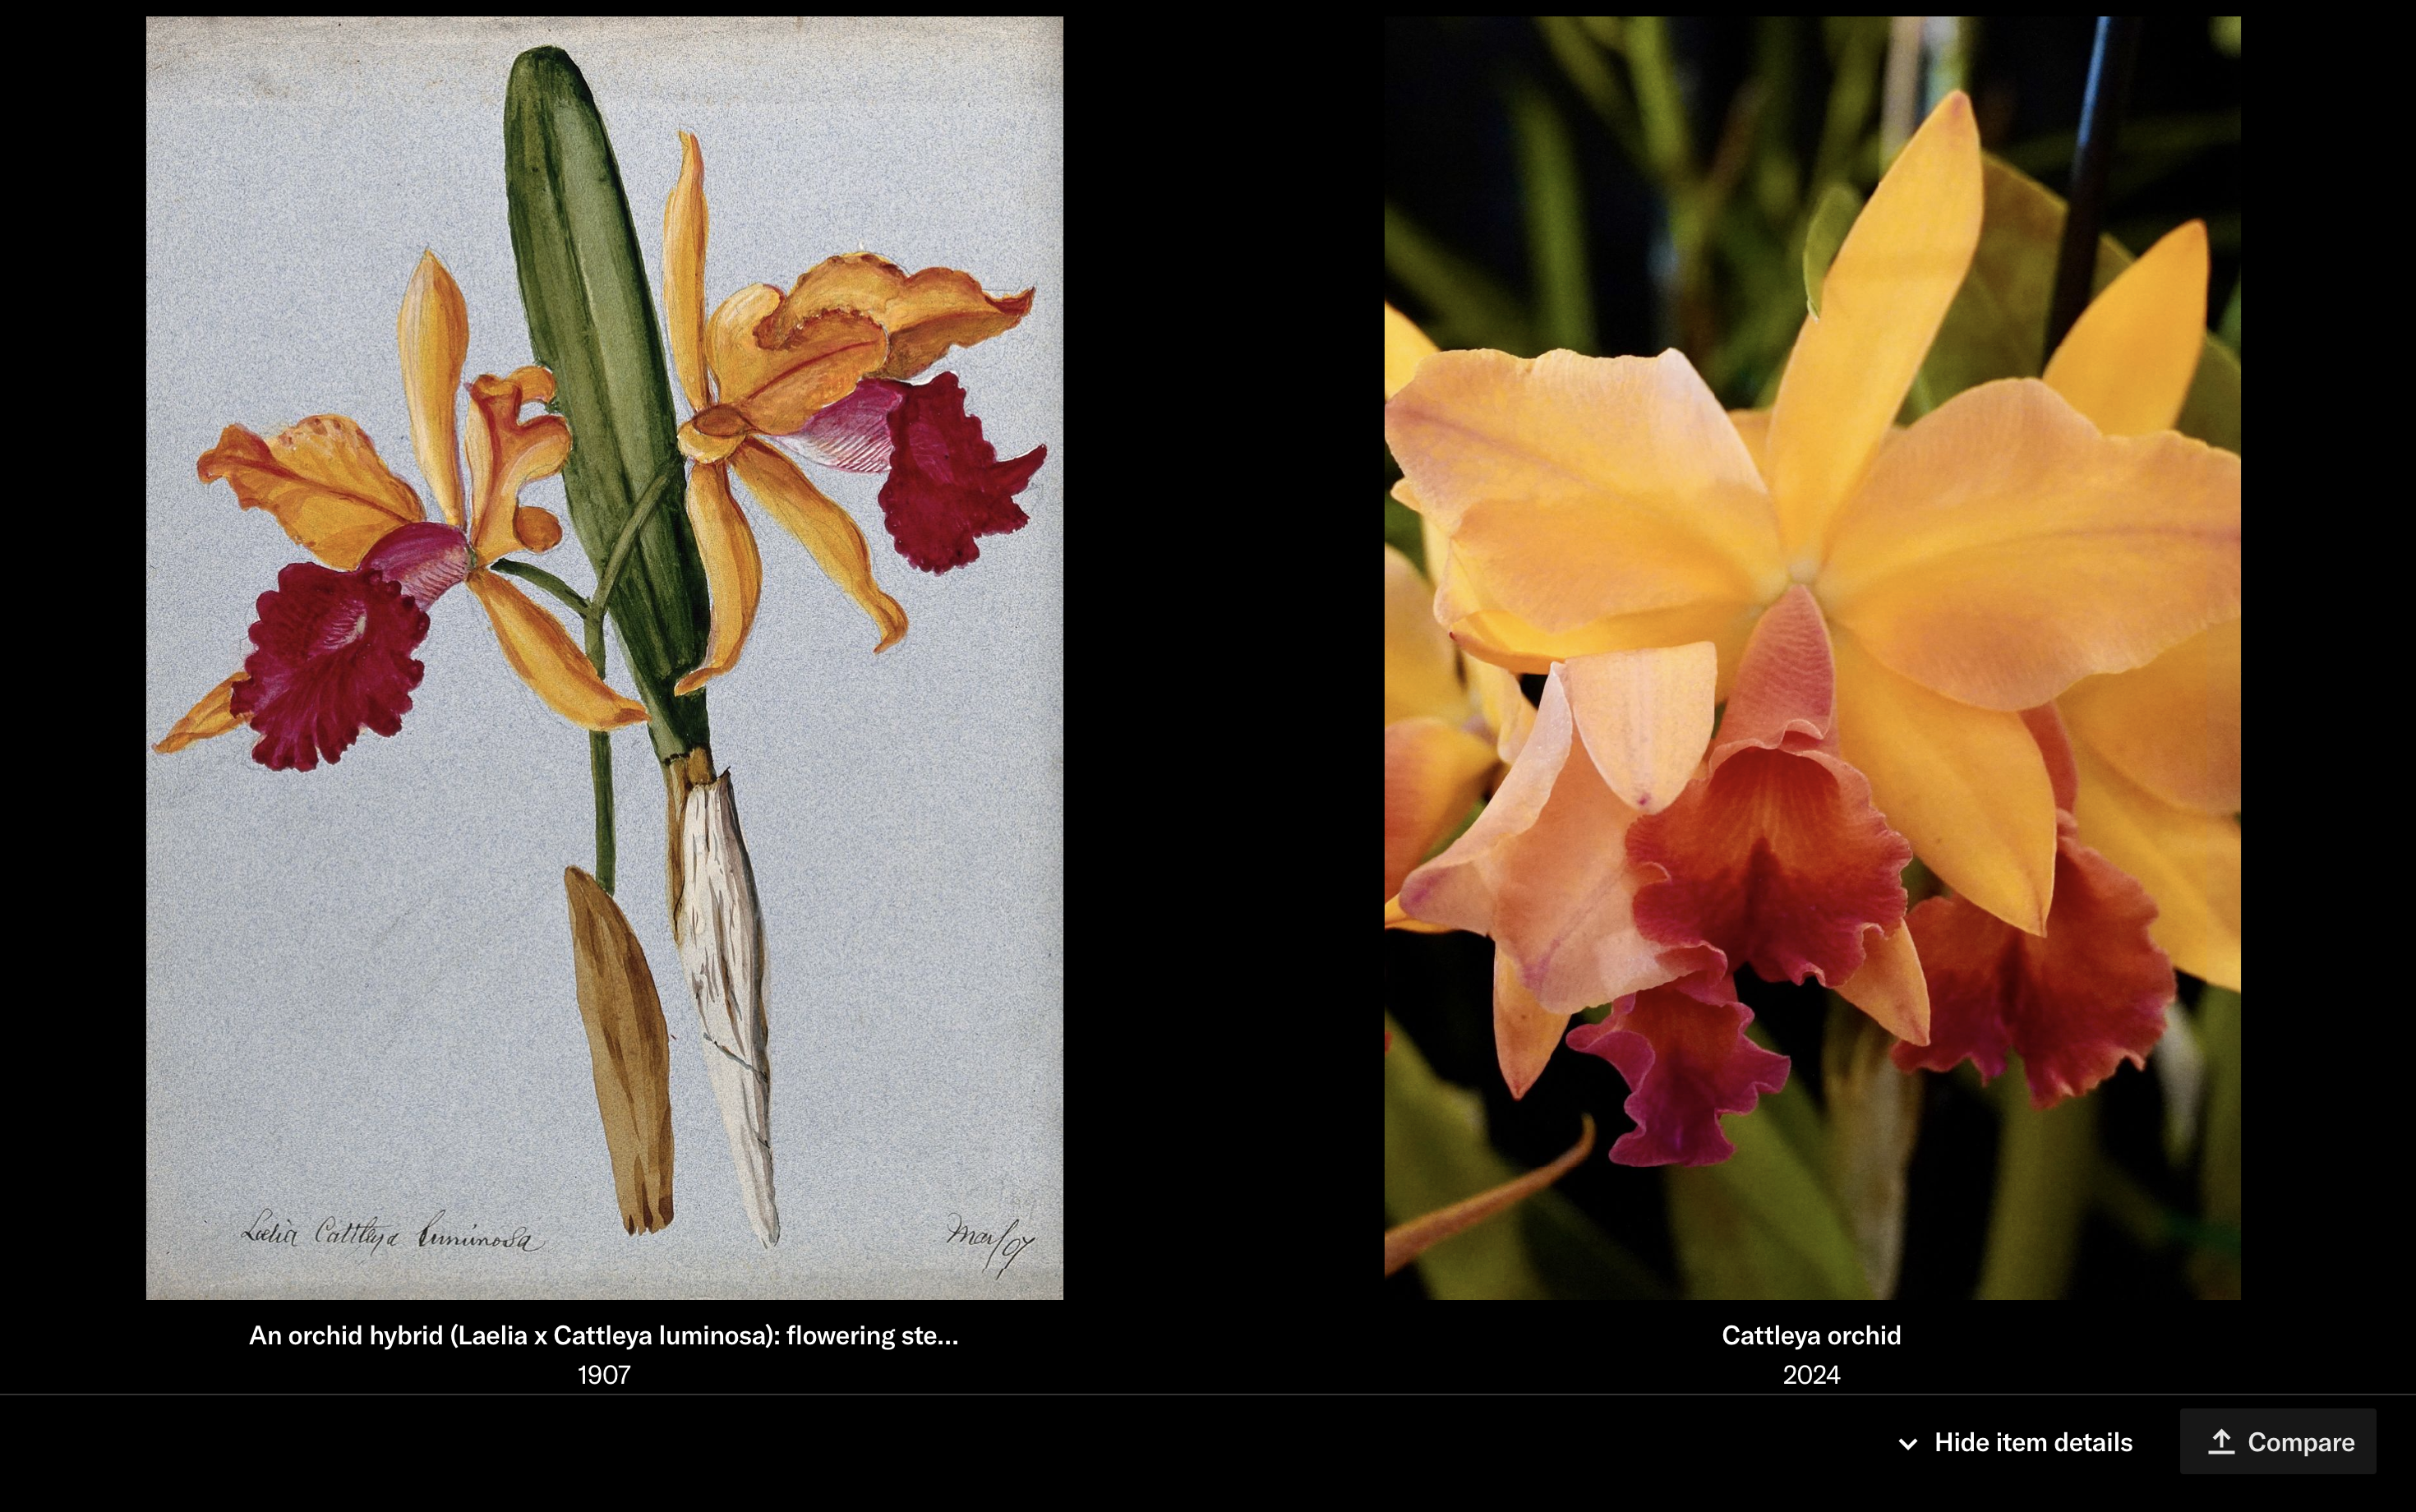 An illustration of an orchid from an open collection on JSTOR compared alongside a uploaded photograph of an orchid using full screen compare mode